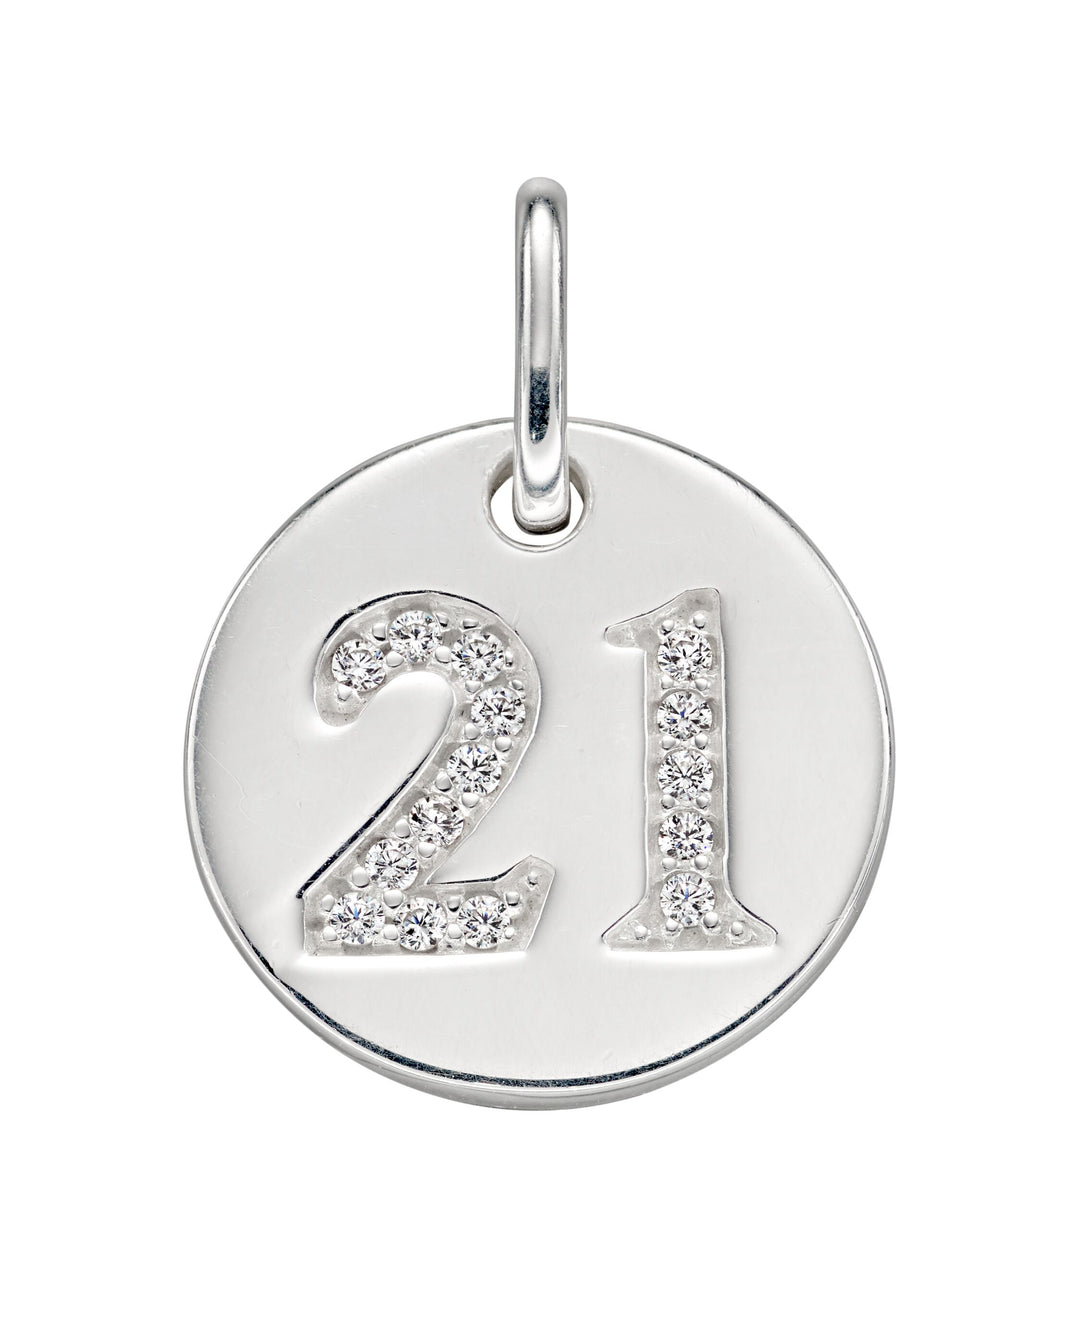 Special Occasion '21' Charm